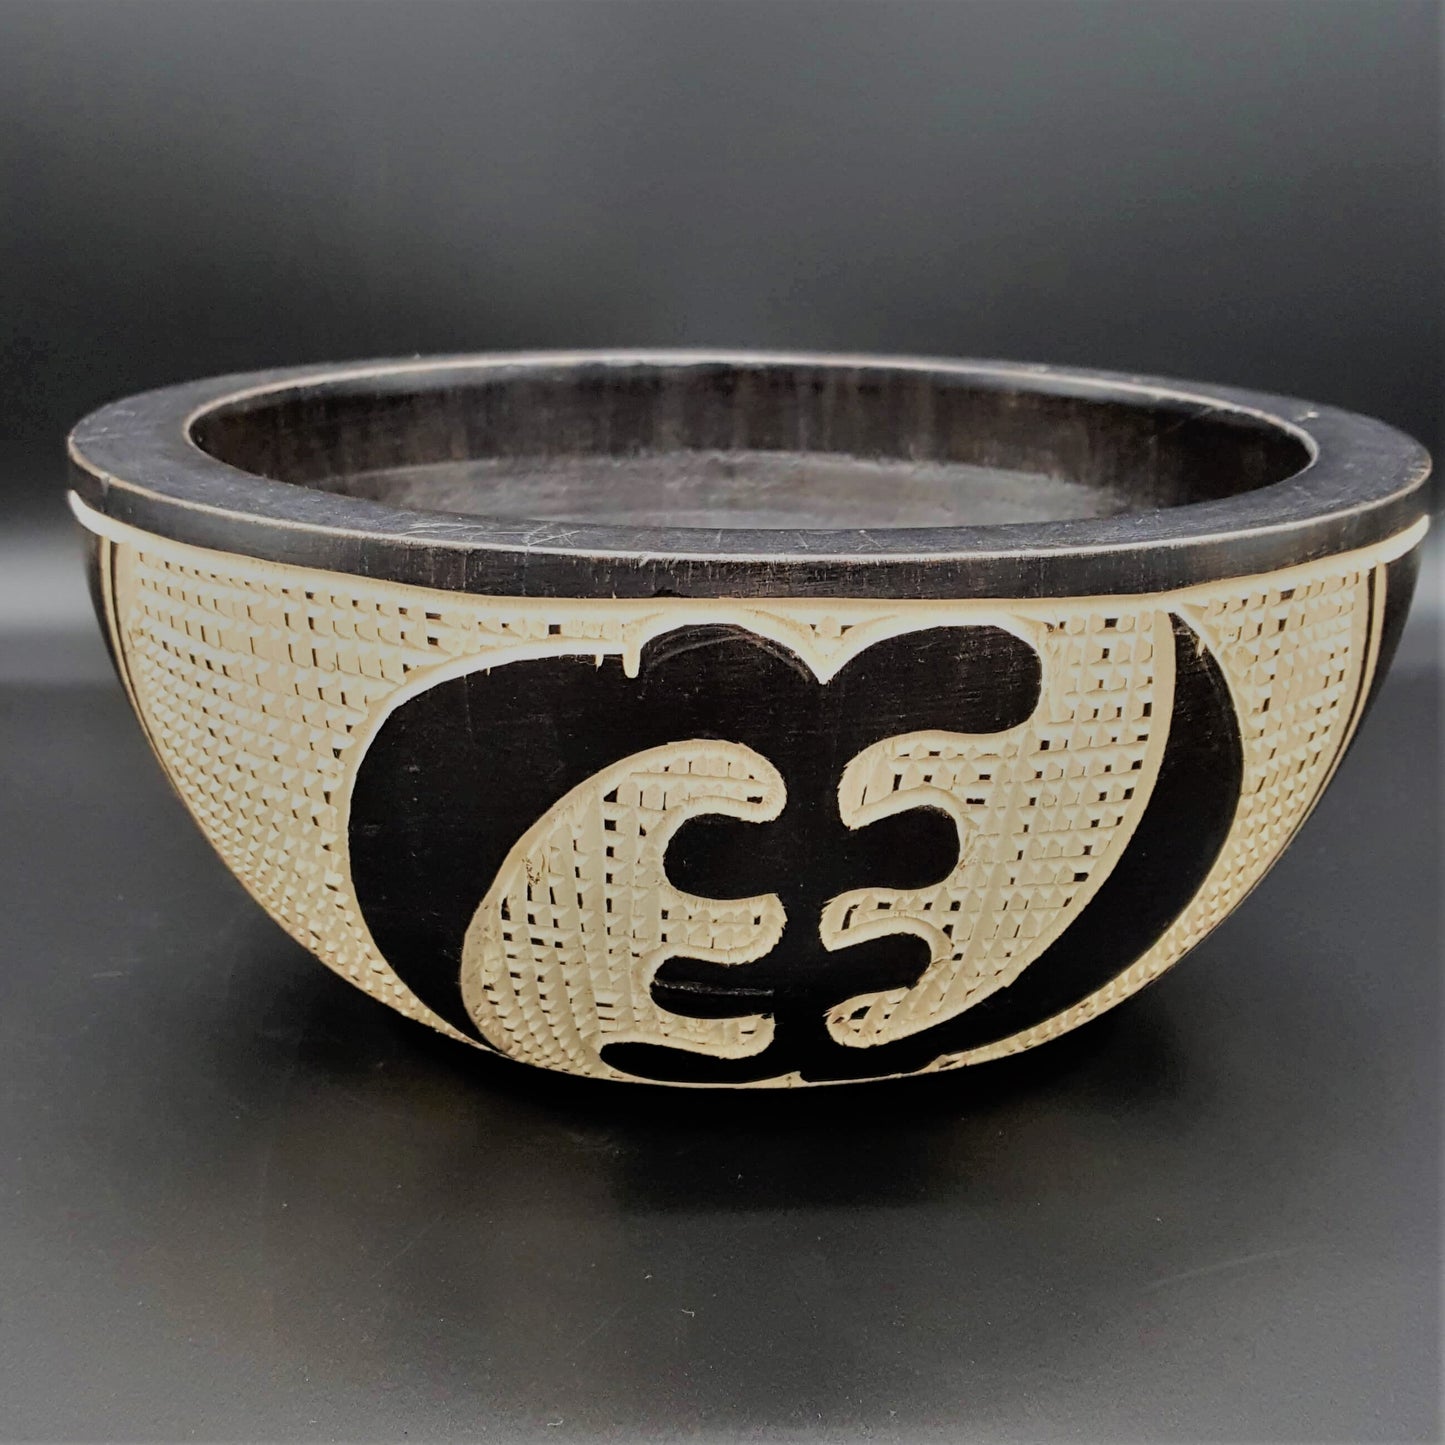 Handmade solid wood carved bowl & unity stand.